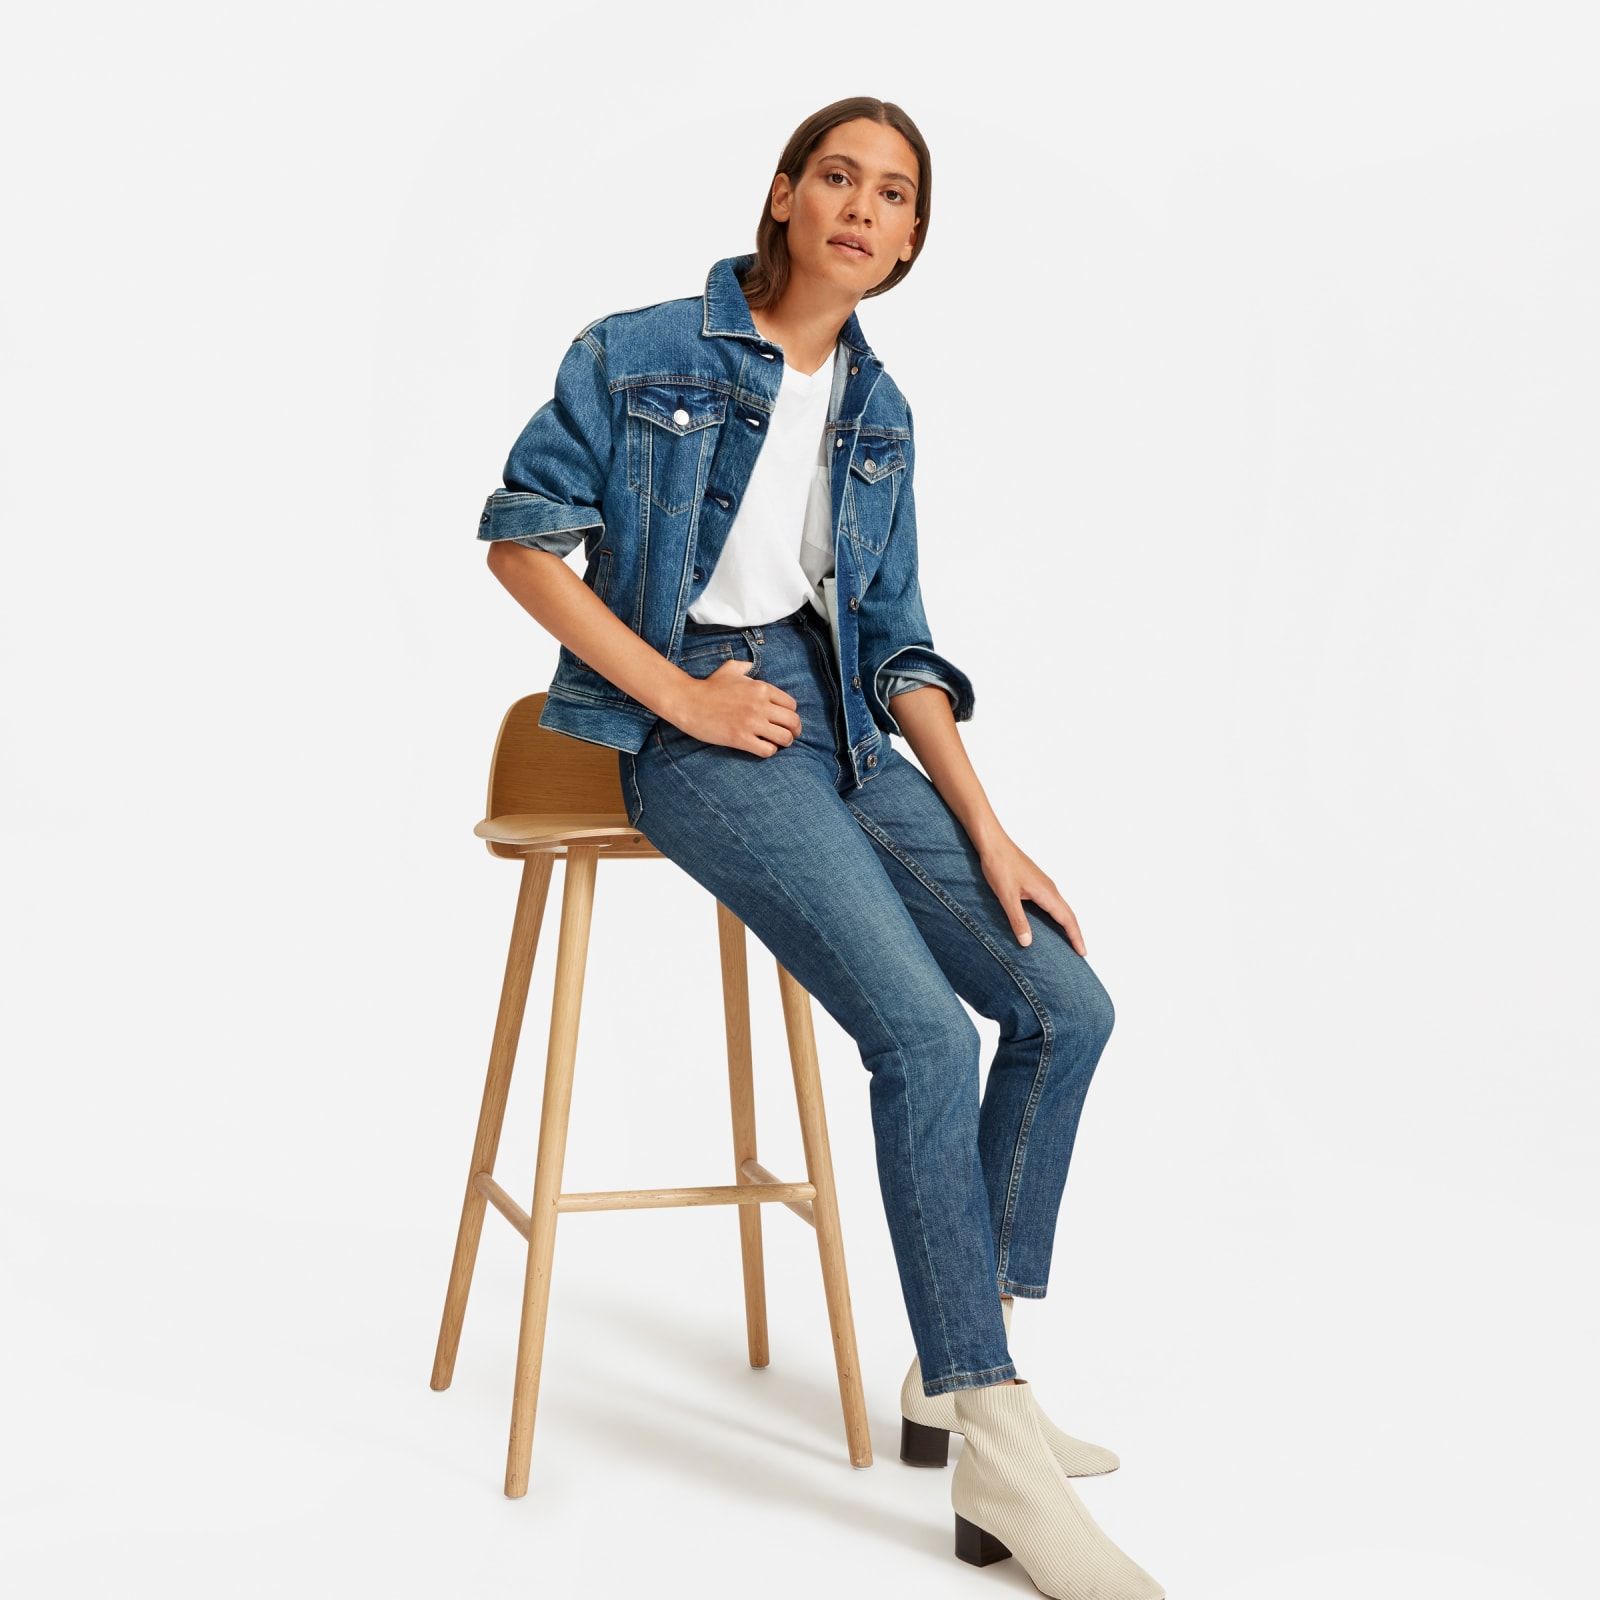 Women's Cheeky Straight Jean by Everlane in Faded Indigo Wash, Size 24 | Everlane